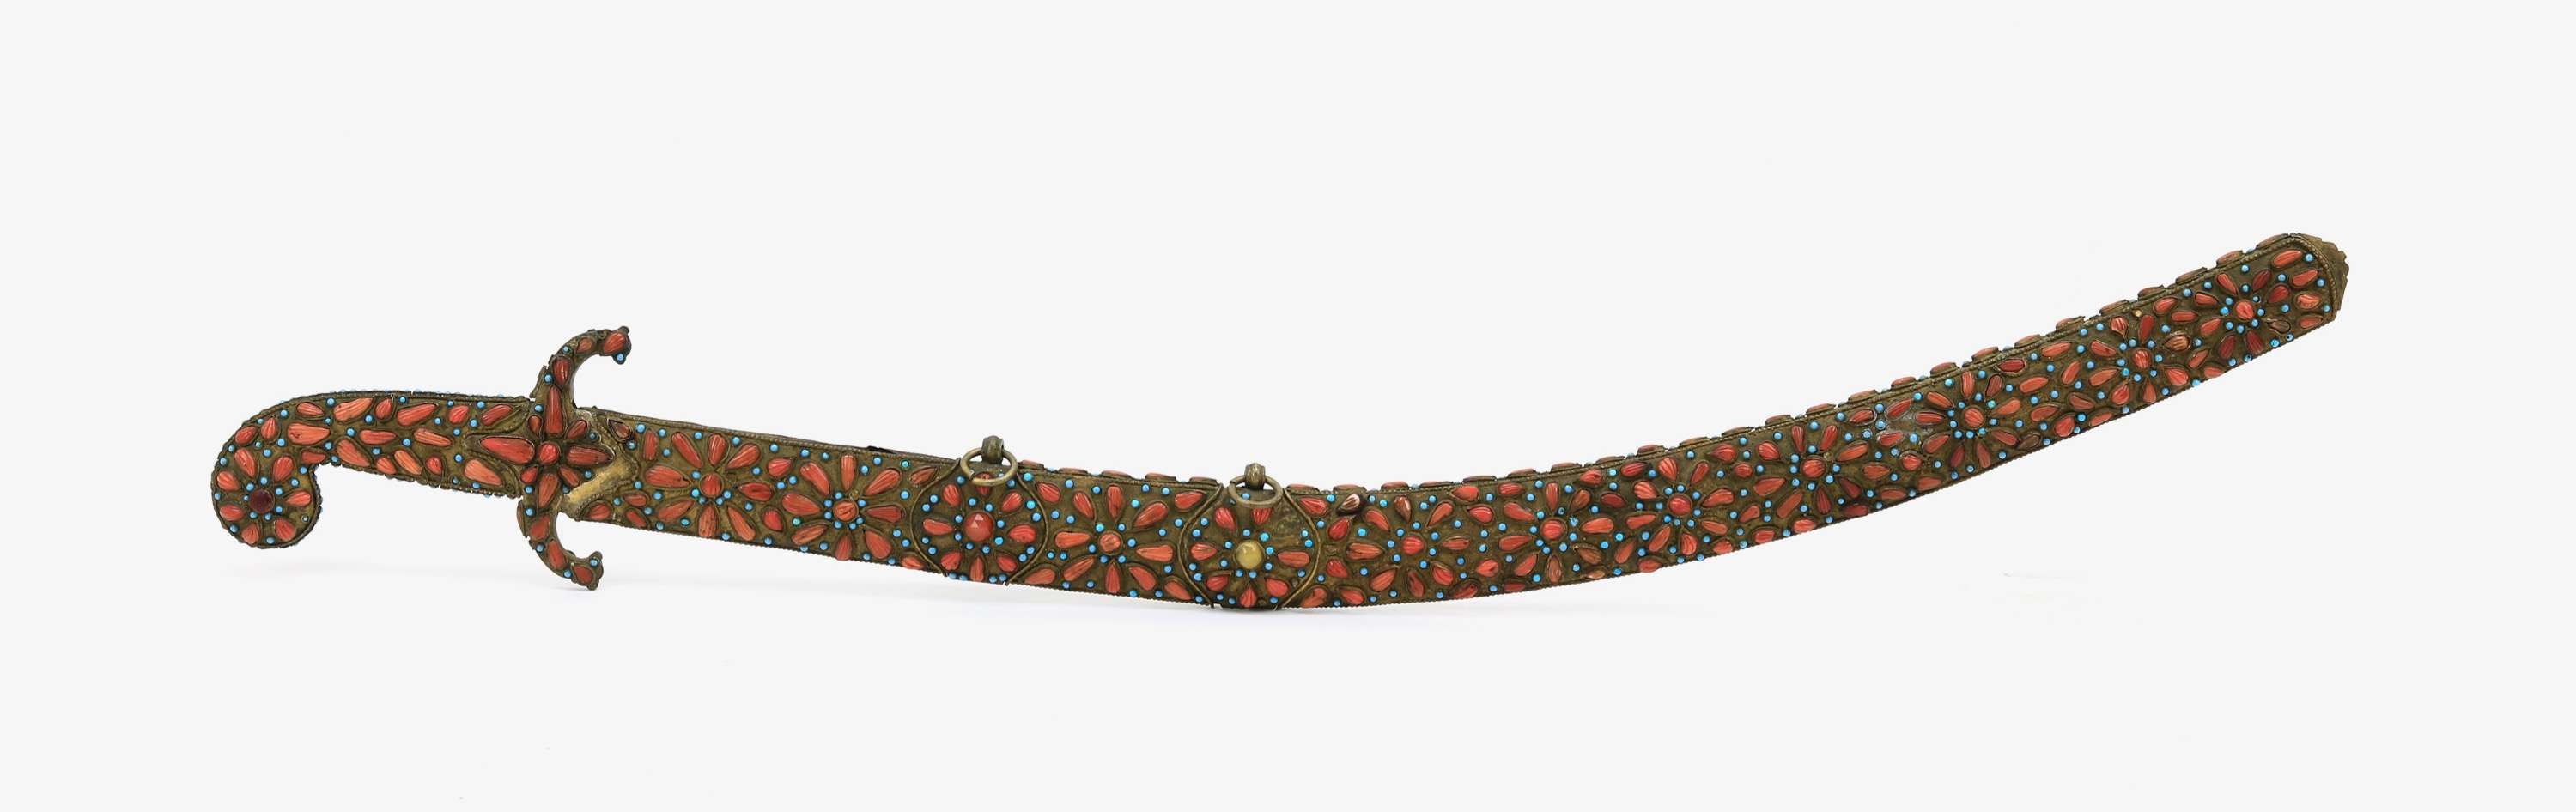 Ottoman pala beset with coral and turquoises